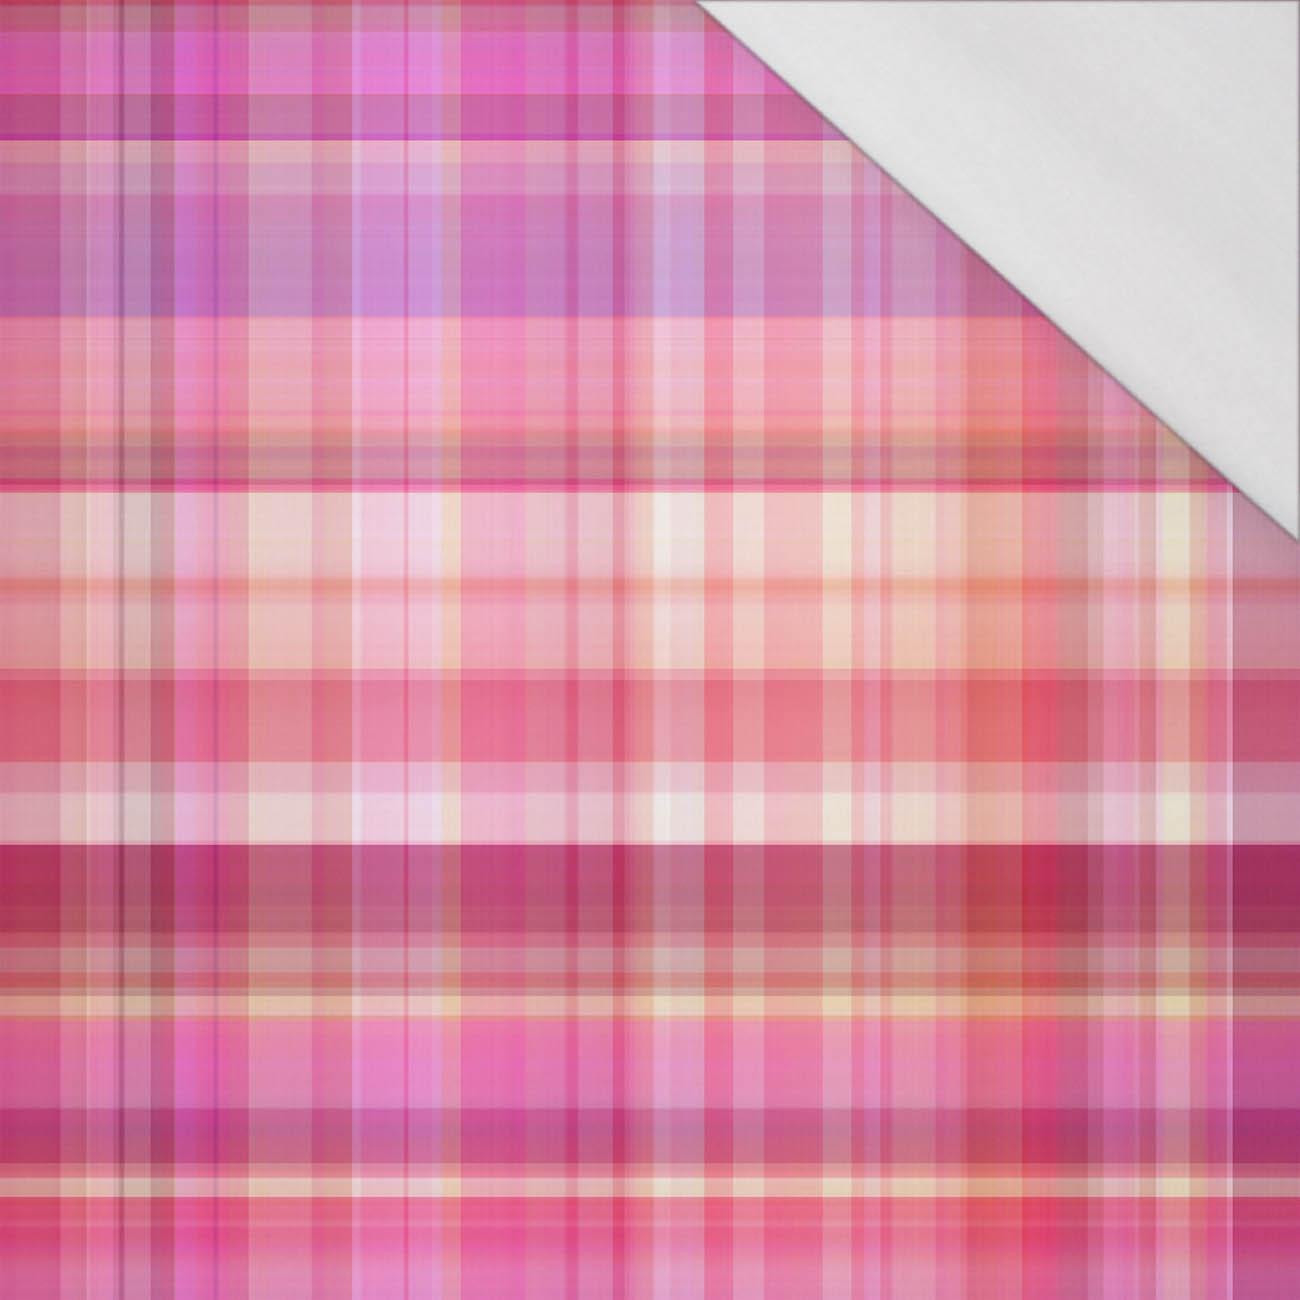 PINK CHECK PAT. 1 - single jersey with elastane 